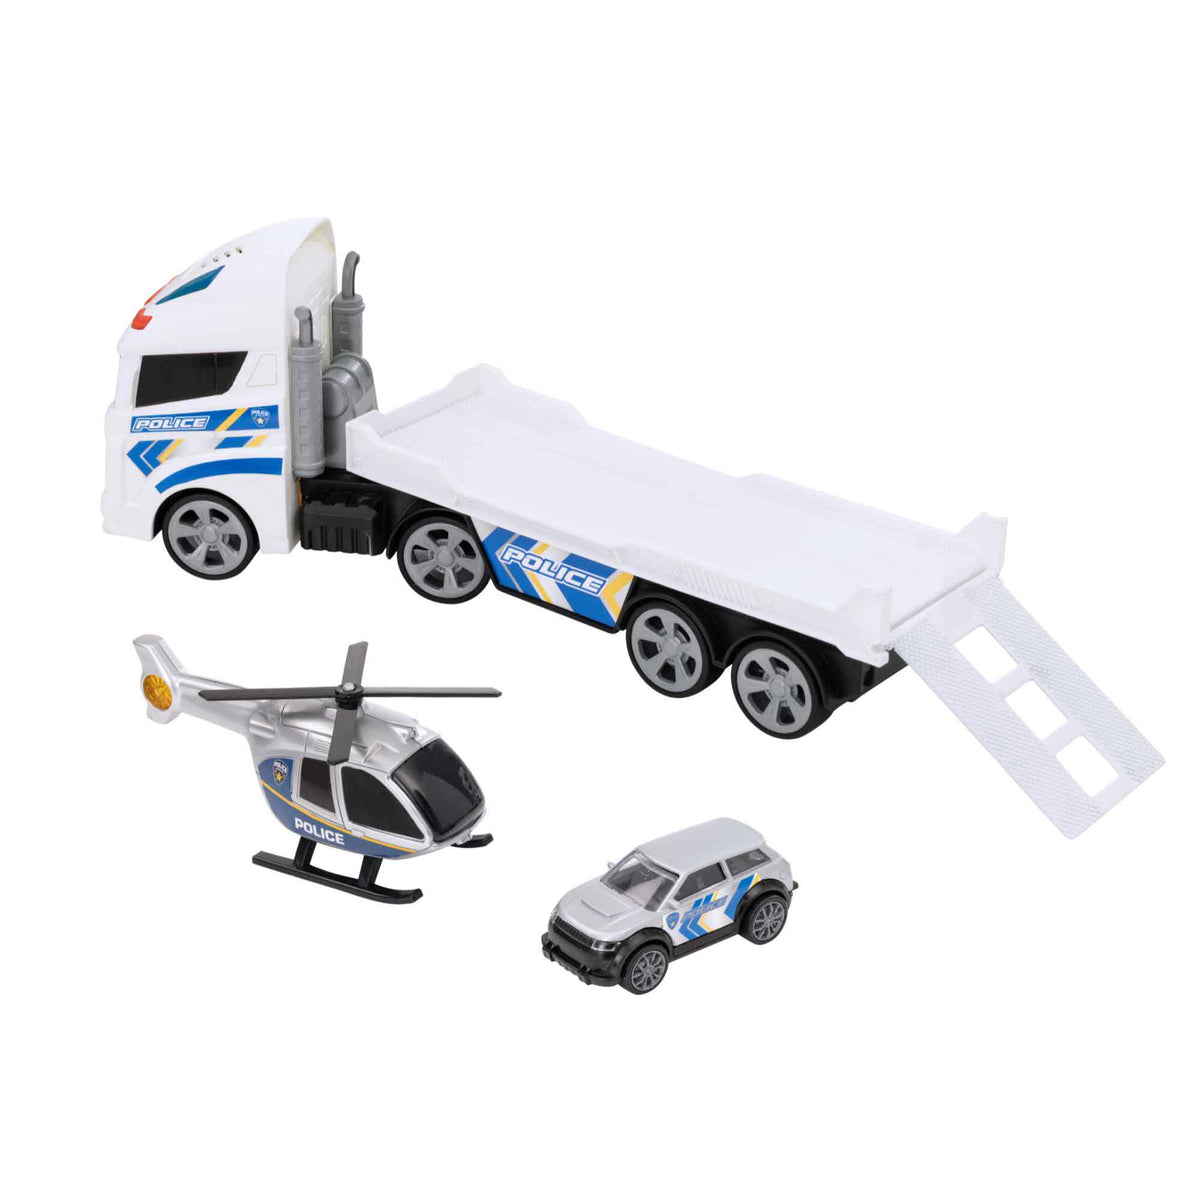 Teamsterz Mighty Machines Small Police Helicopter Transporter